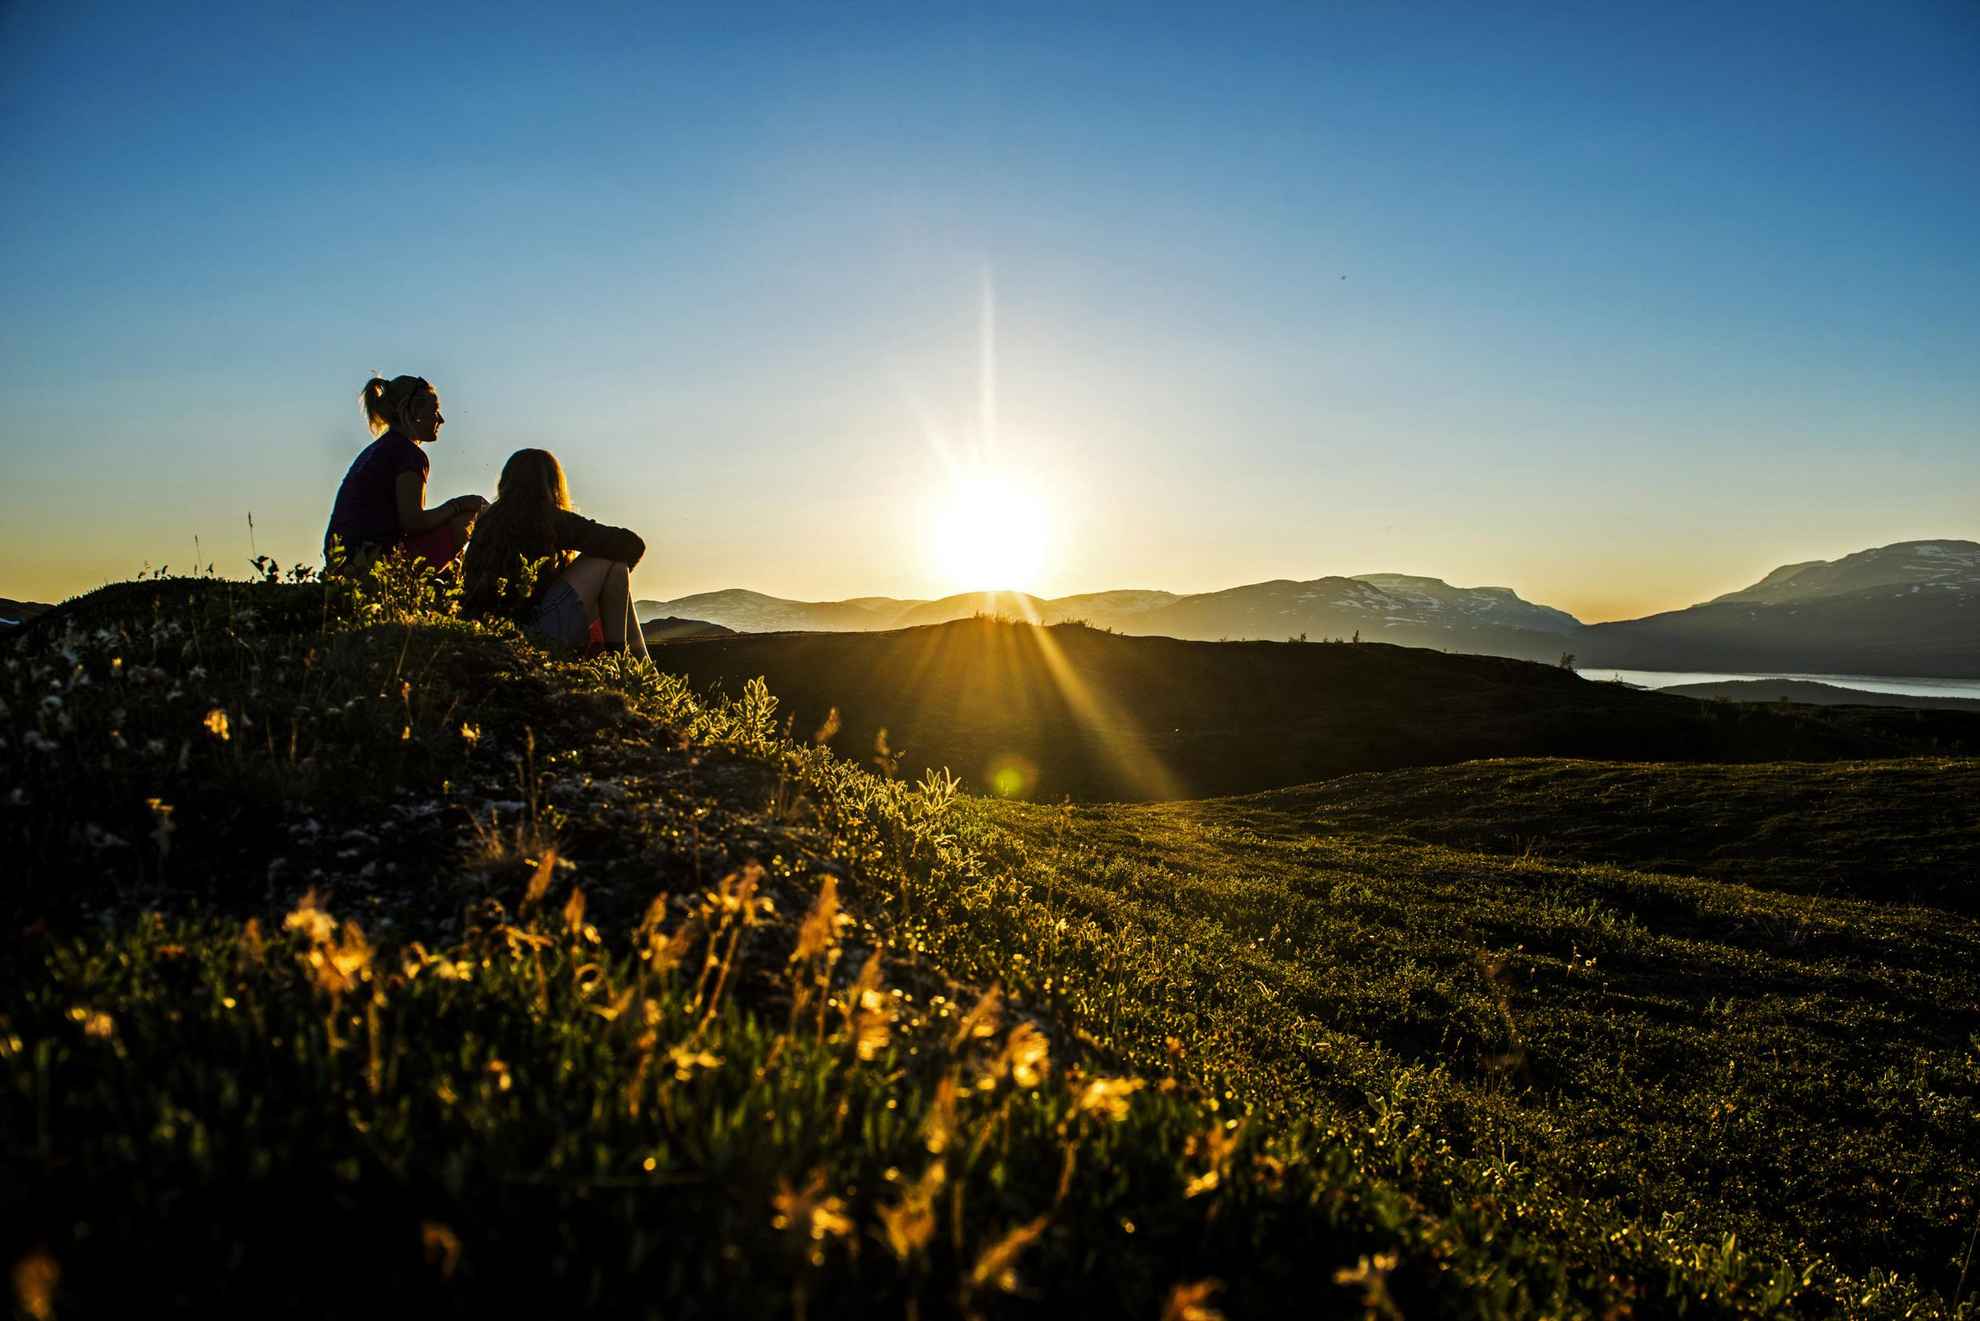 Two women are sitting on a hill in the mountains and enjoying the midnight sun.